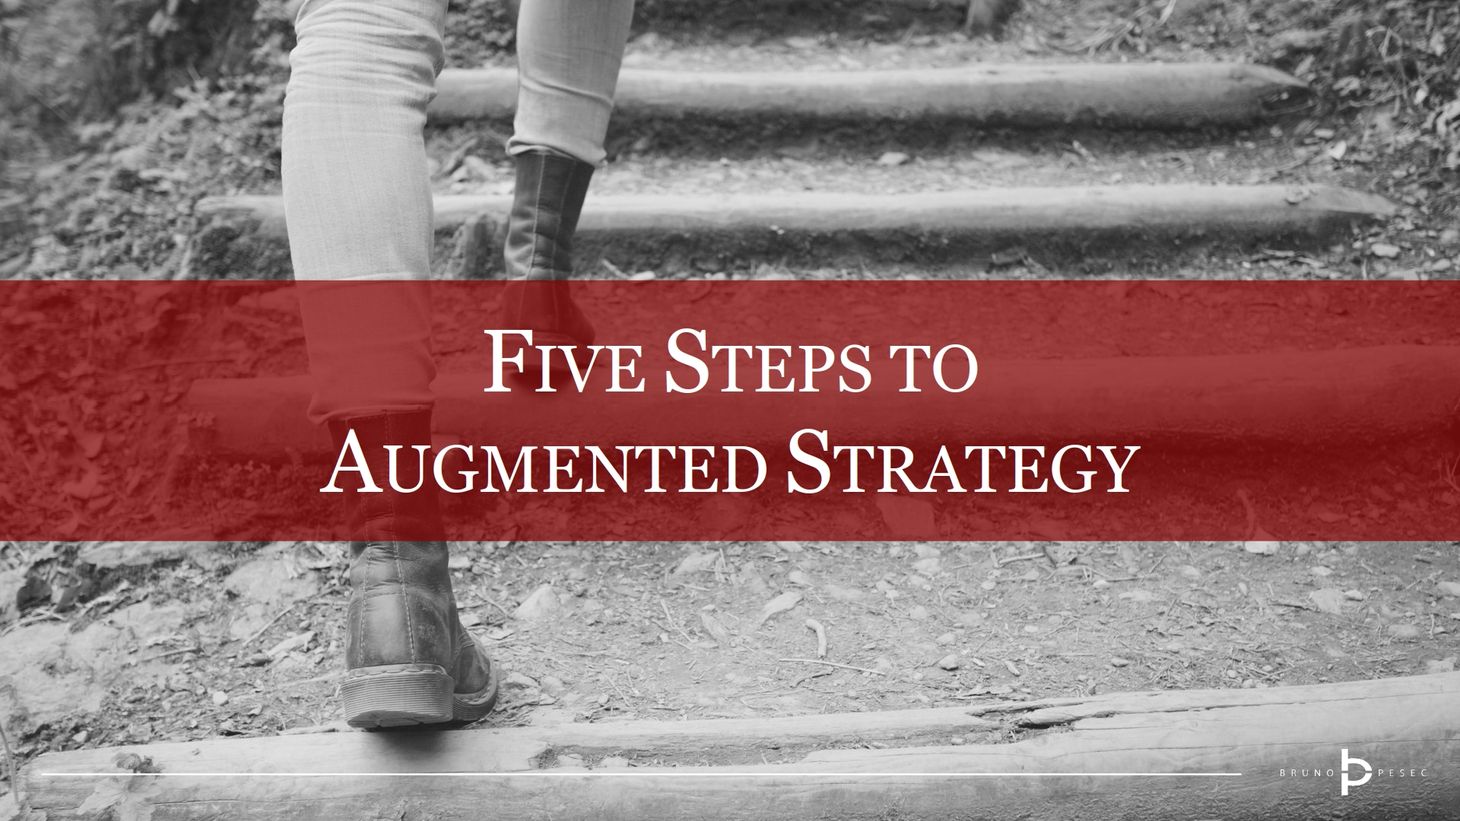 Five steps to augmented strategy